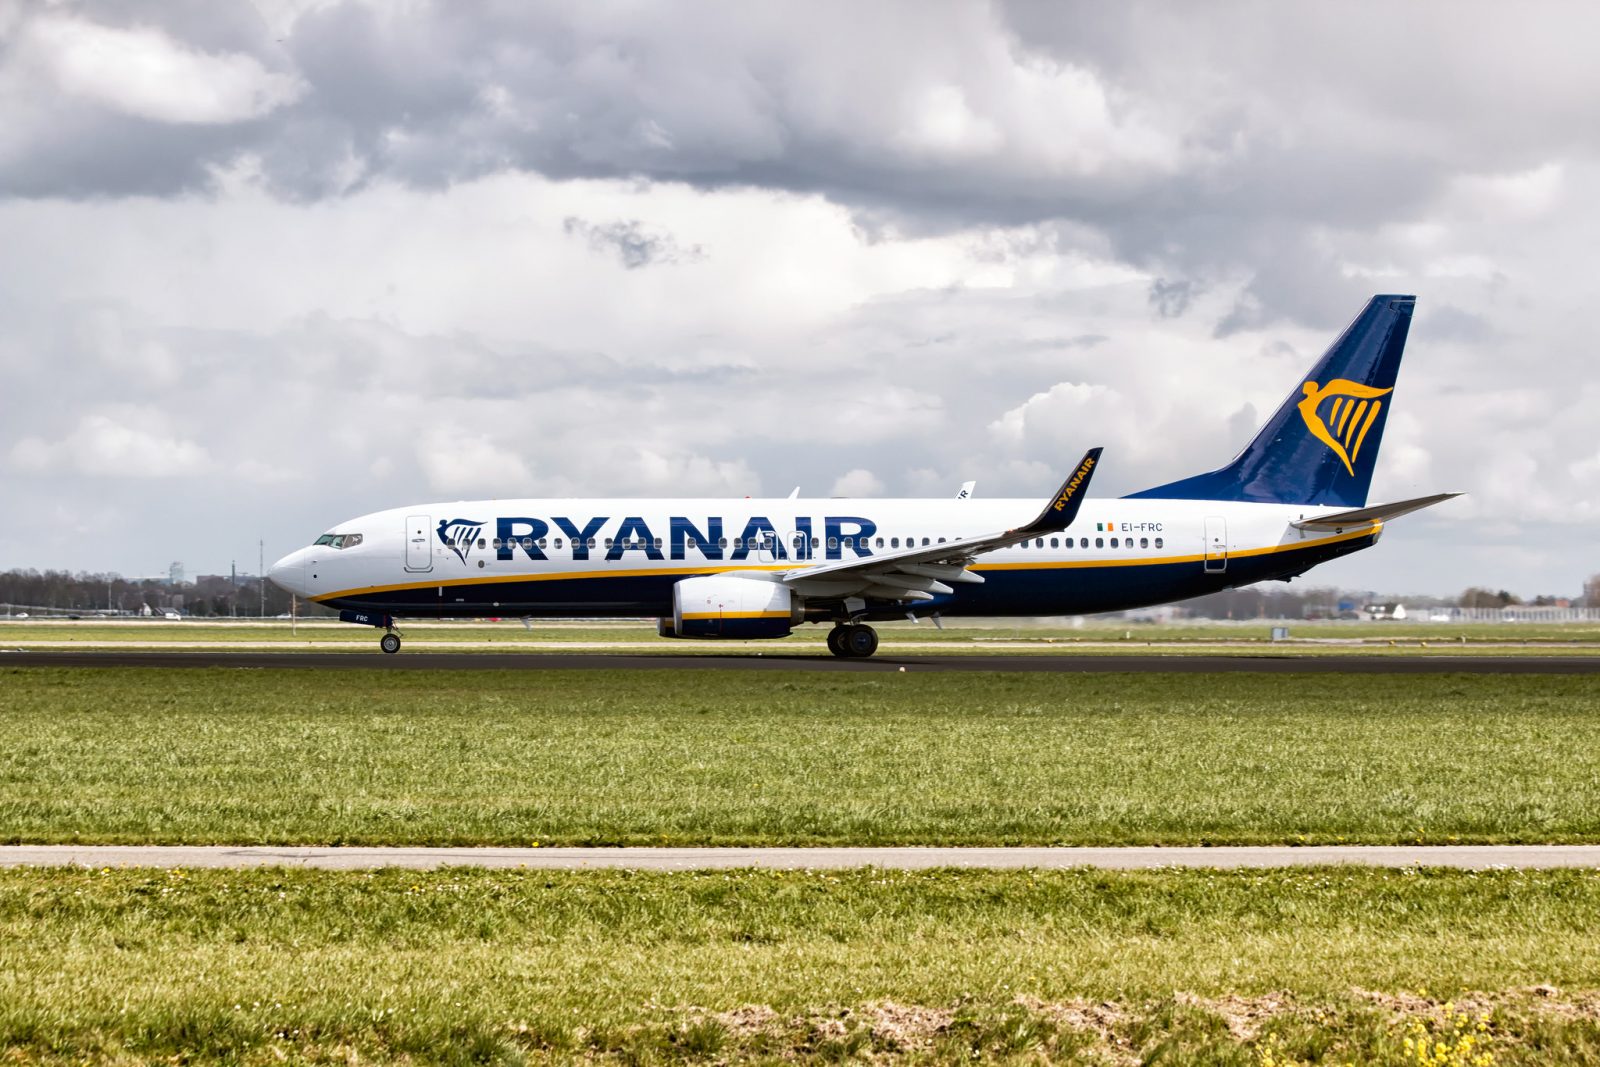 Conflicted: Ryanair Wins Case Against Compensation Claims Solicitors - Good or Bad for Consumers?